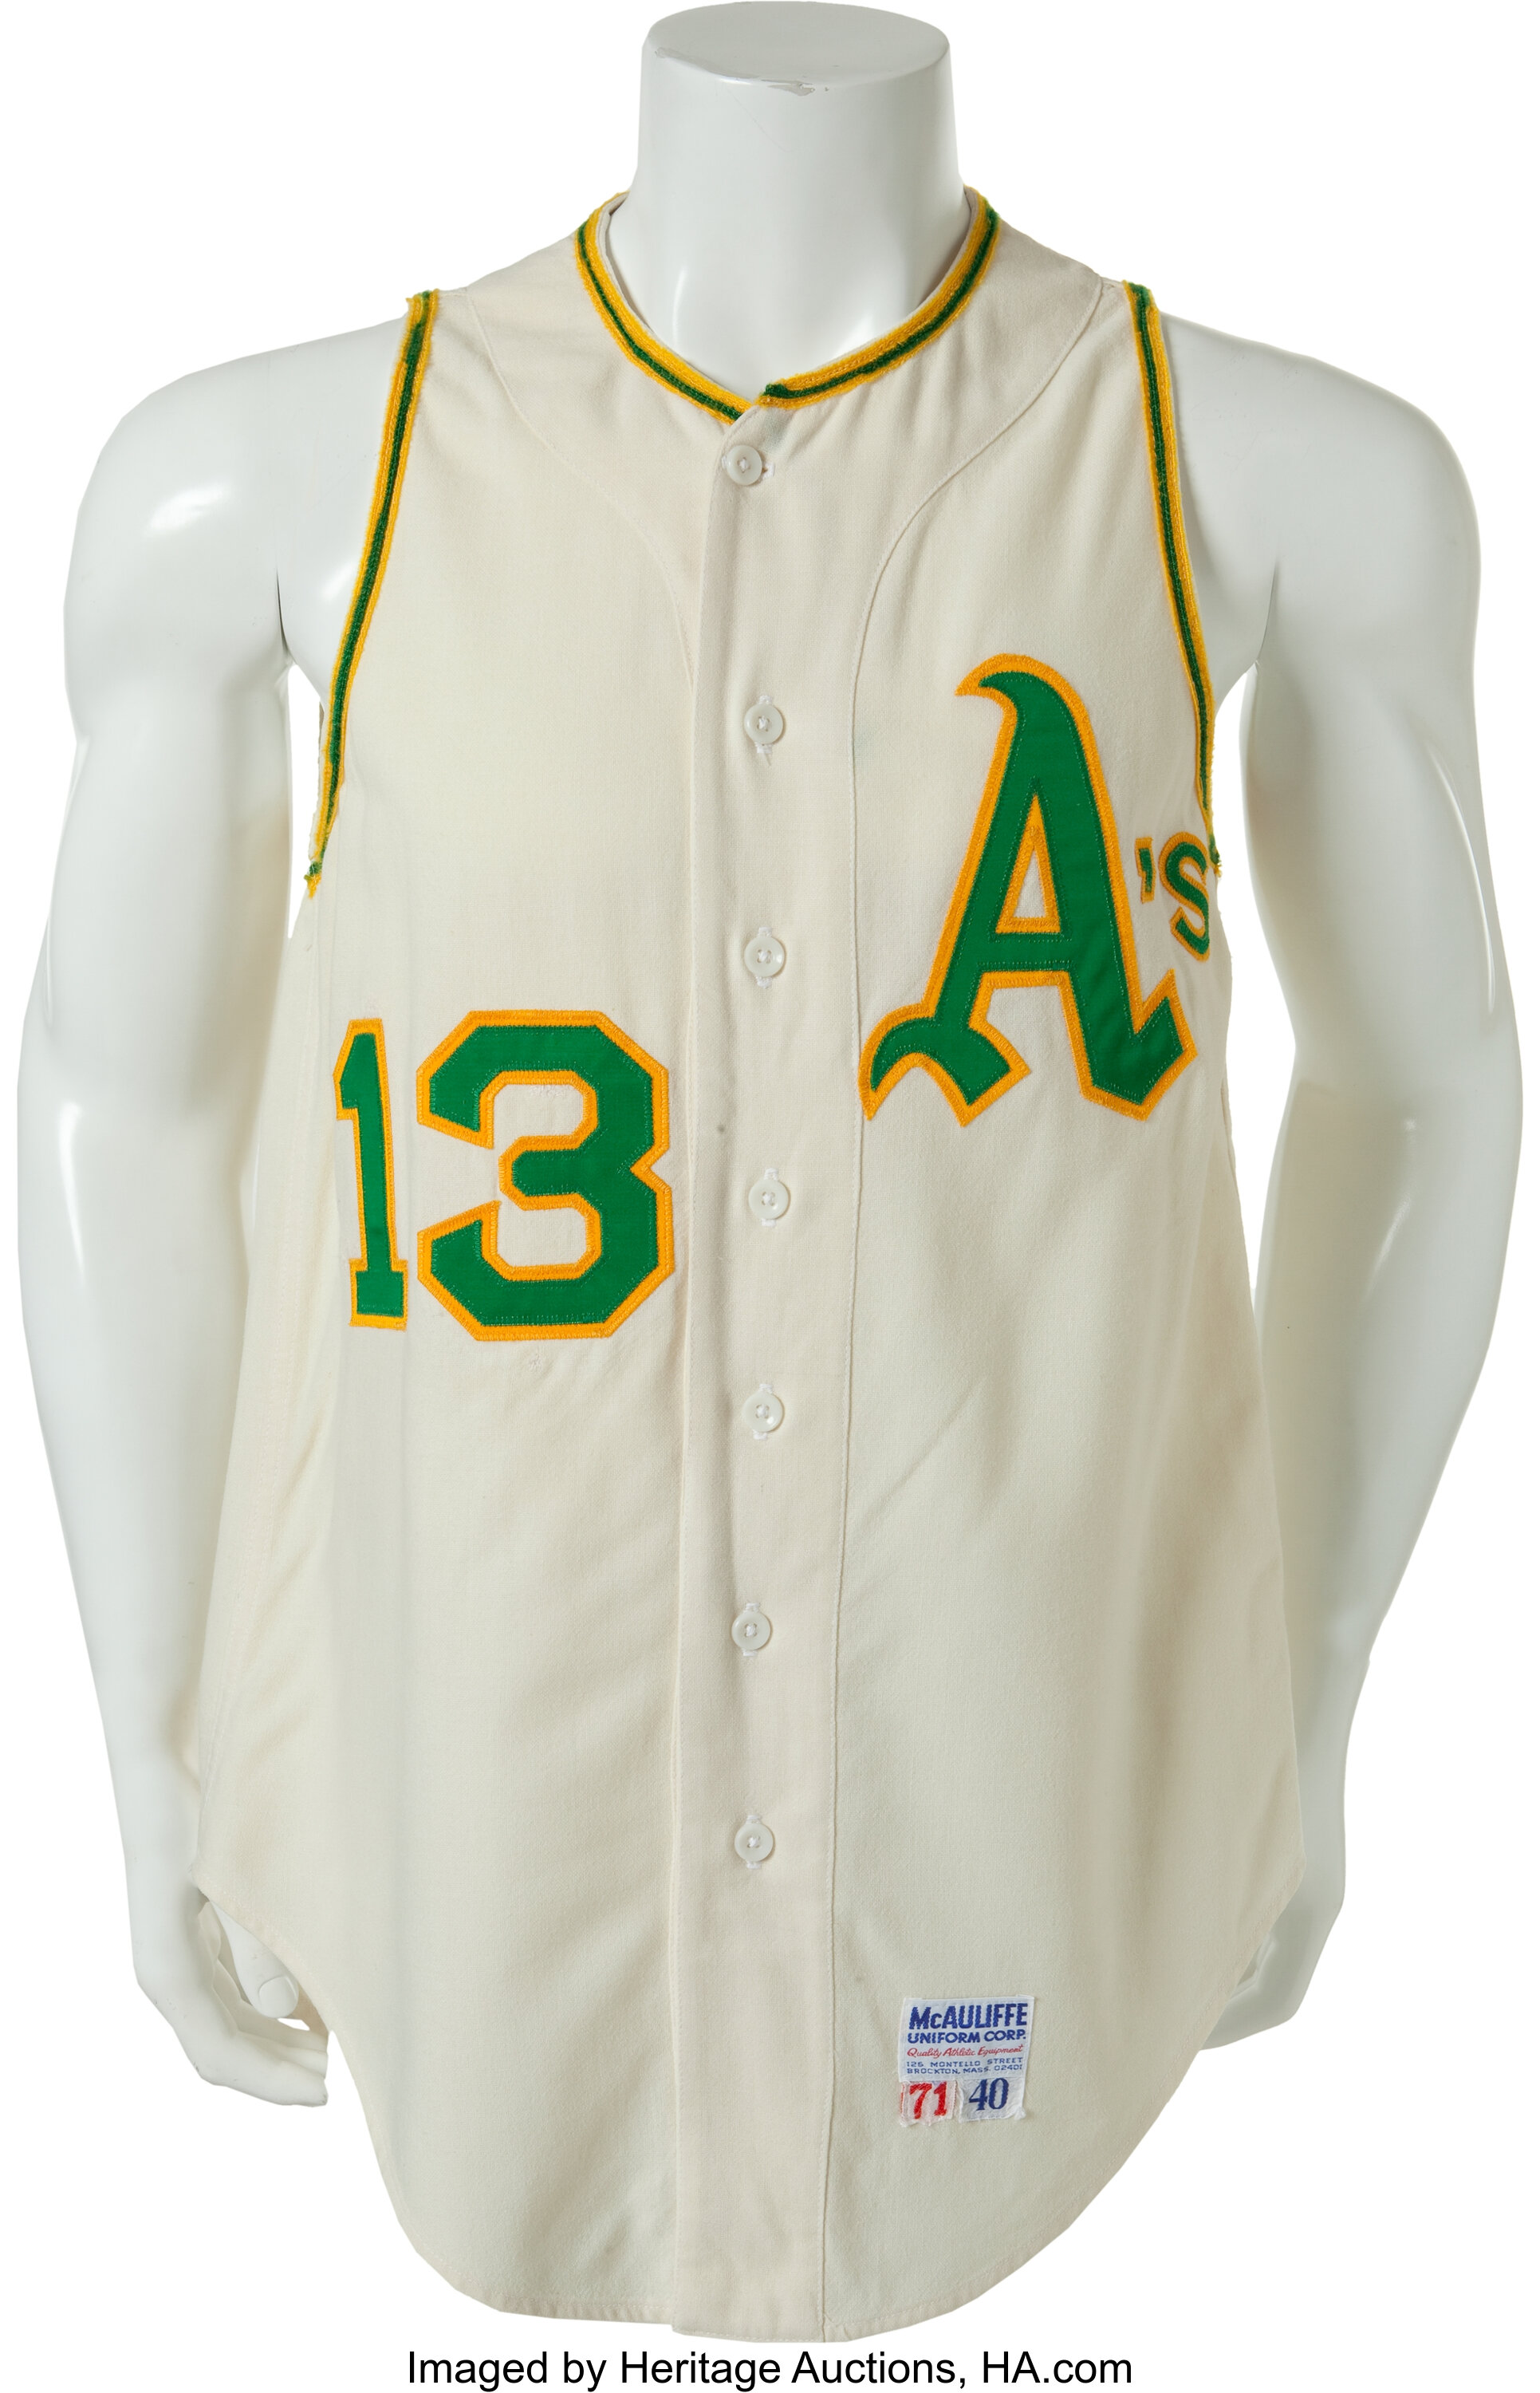 2021 Oakland A's Athletics Blank Game Issued Yellow Jersey 50 DP45487